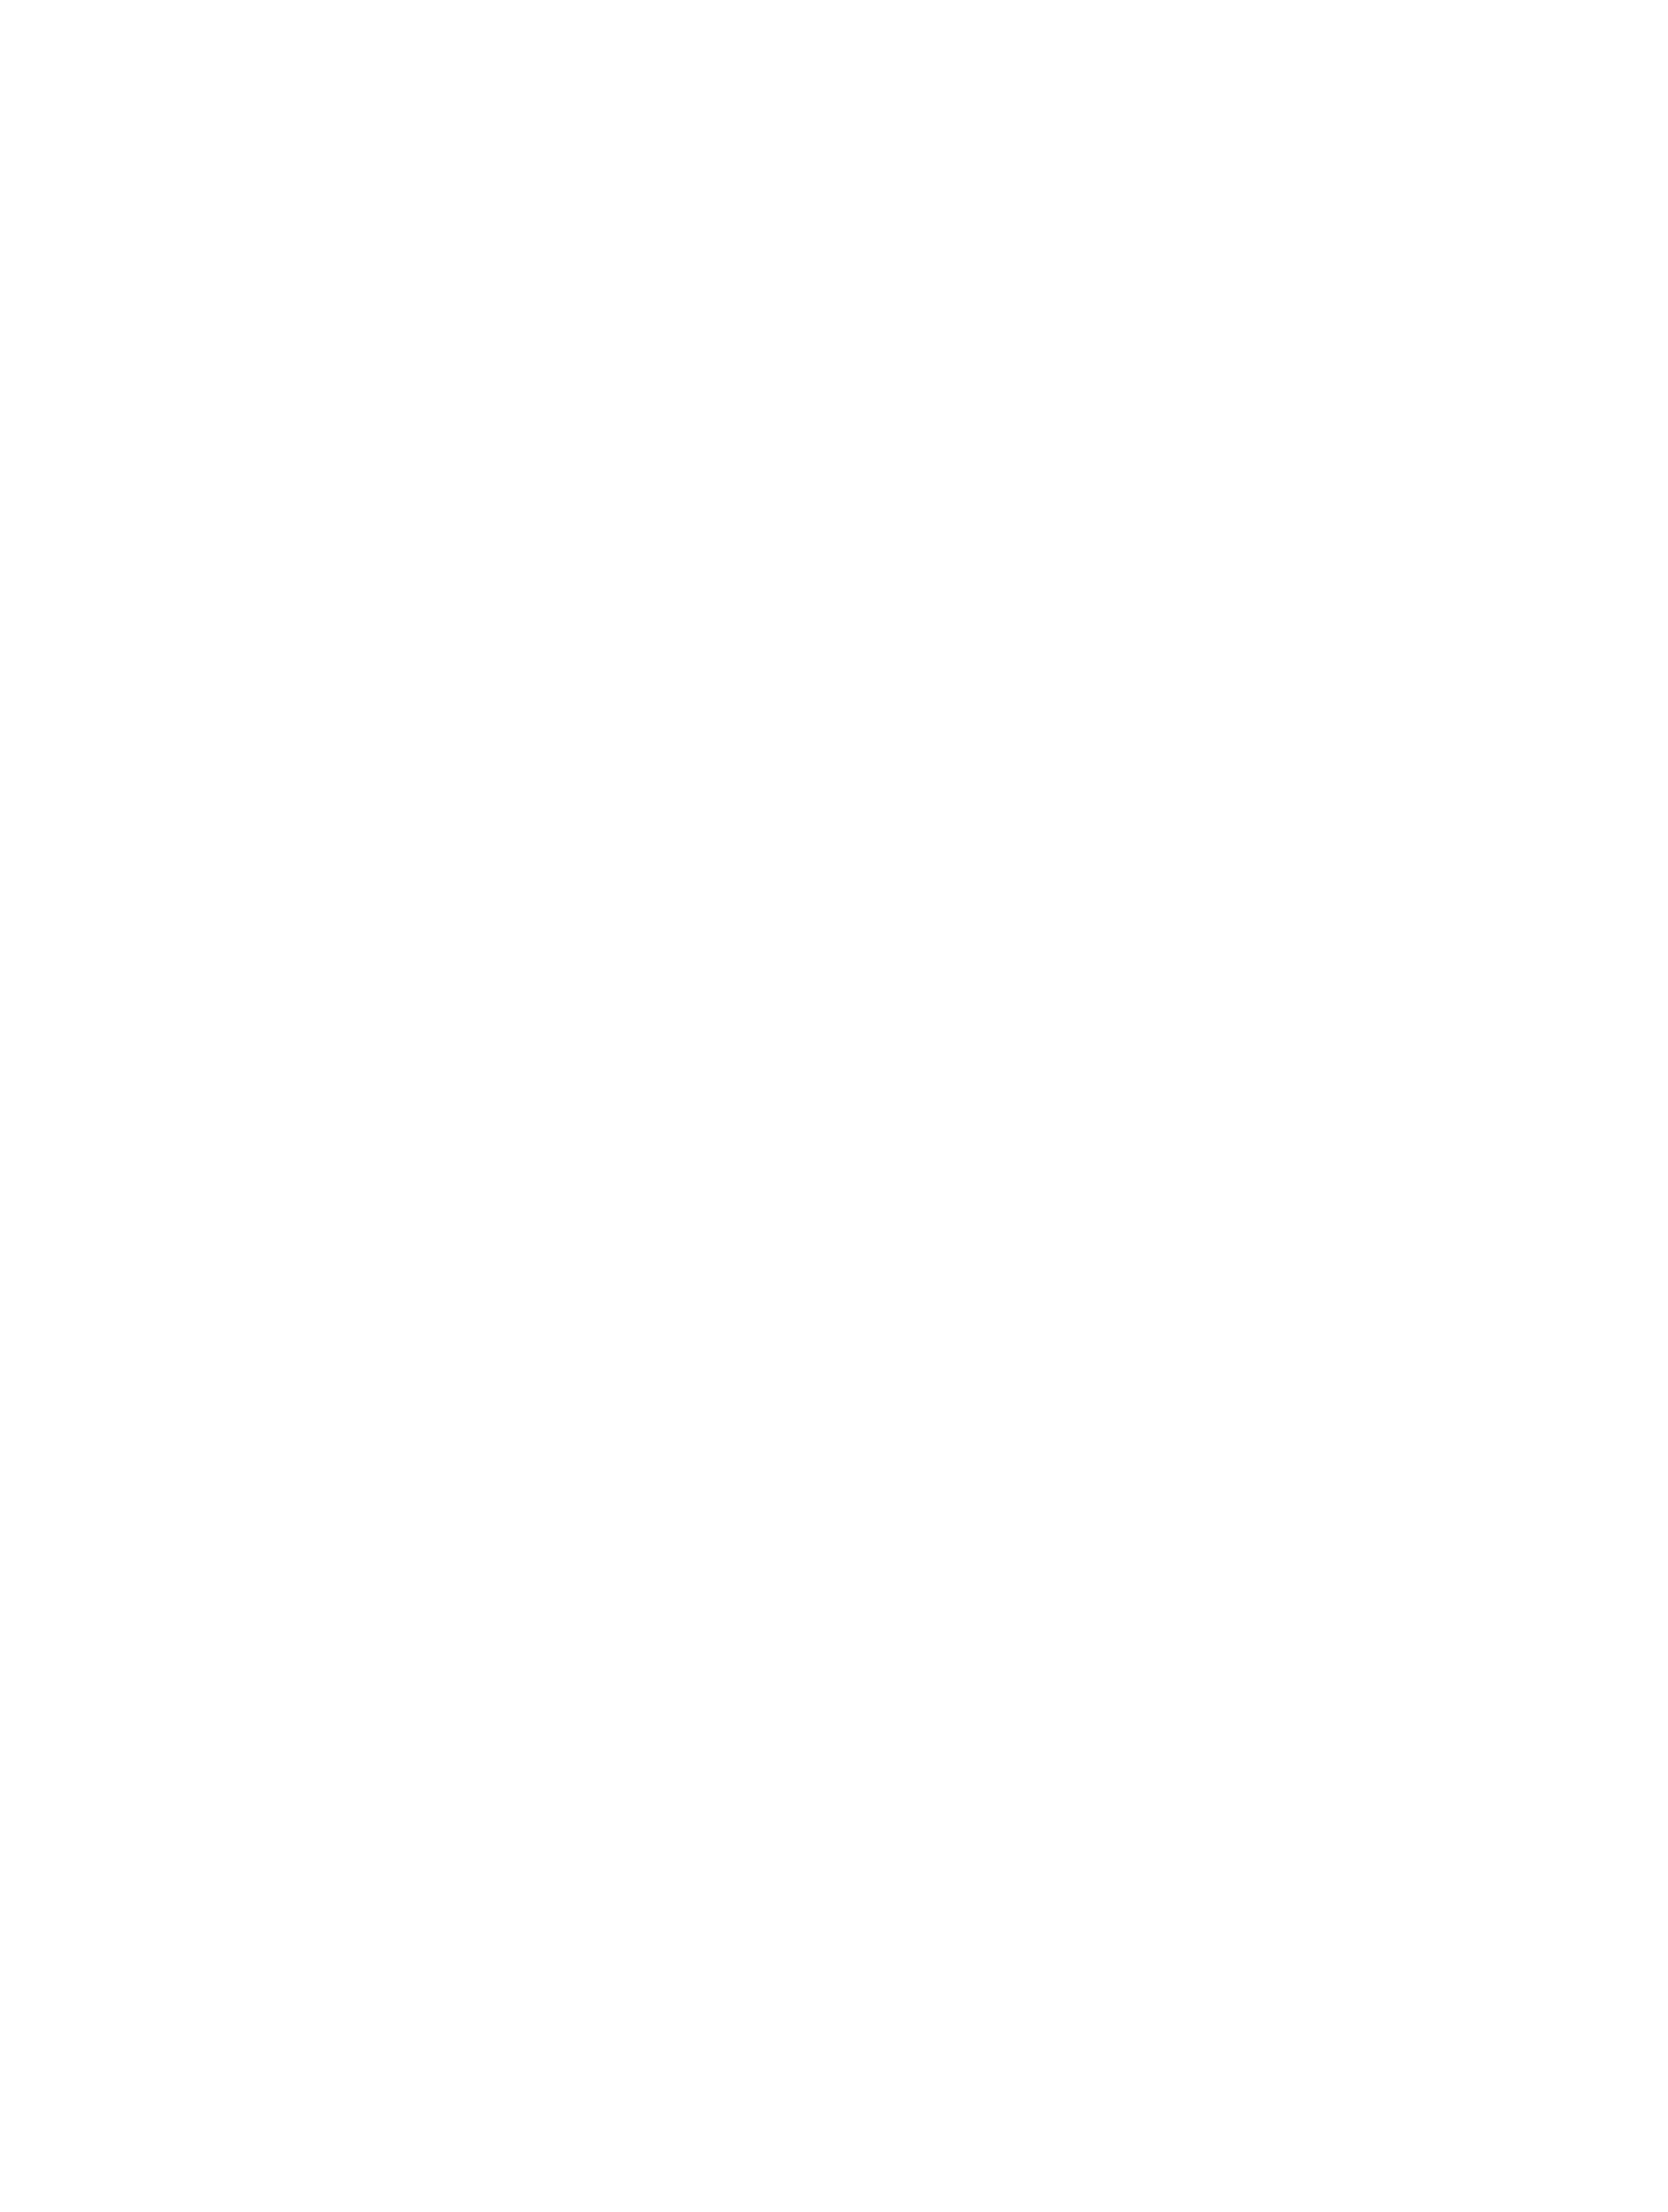 Download Bp Logo Black And White - White Colour Dp For Whatsapp PNG Image  with No Background 